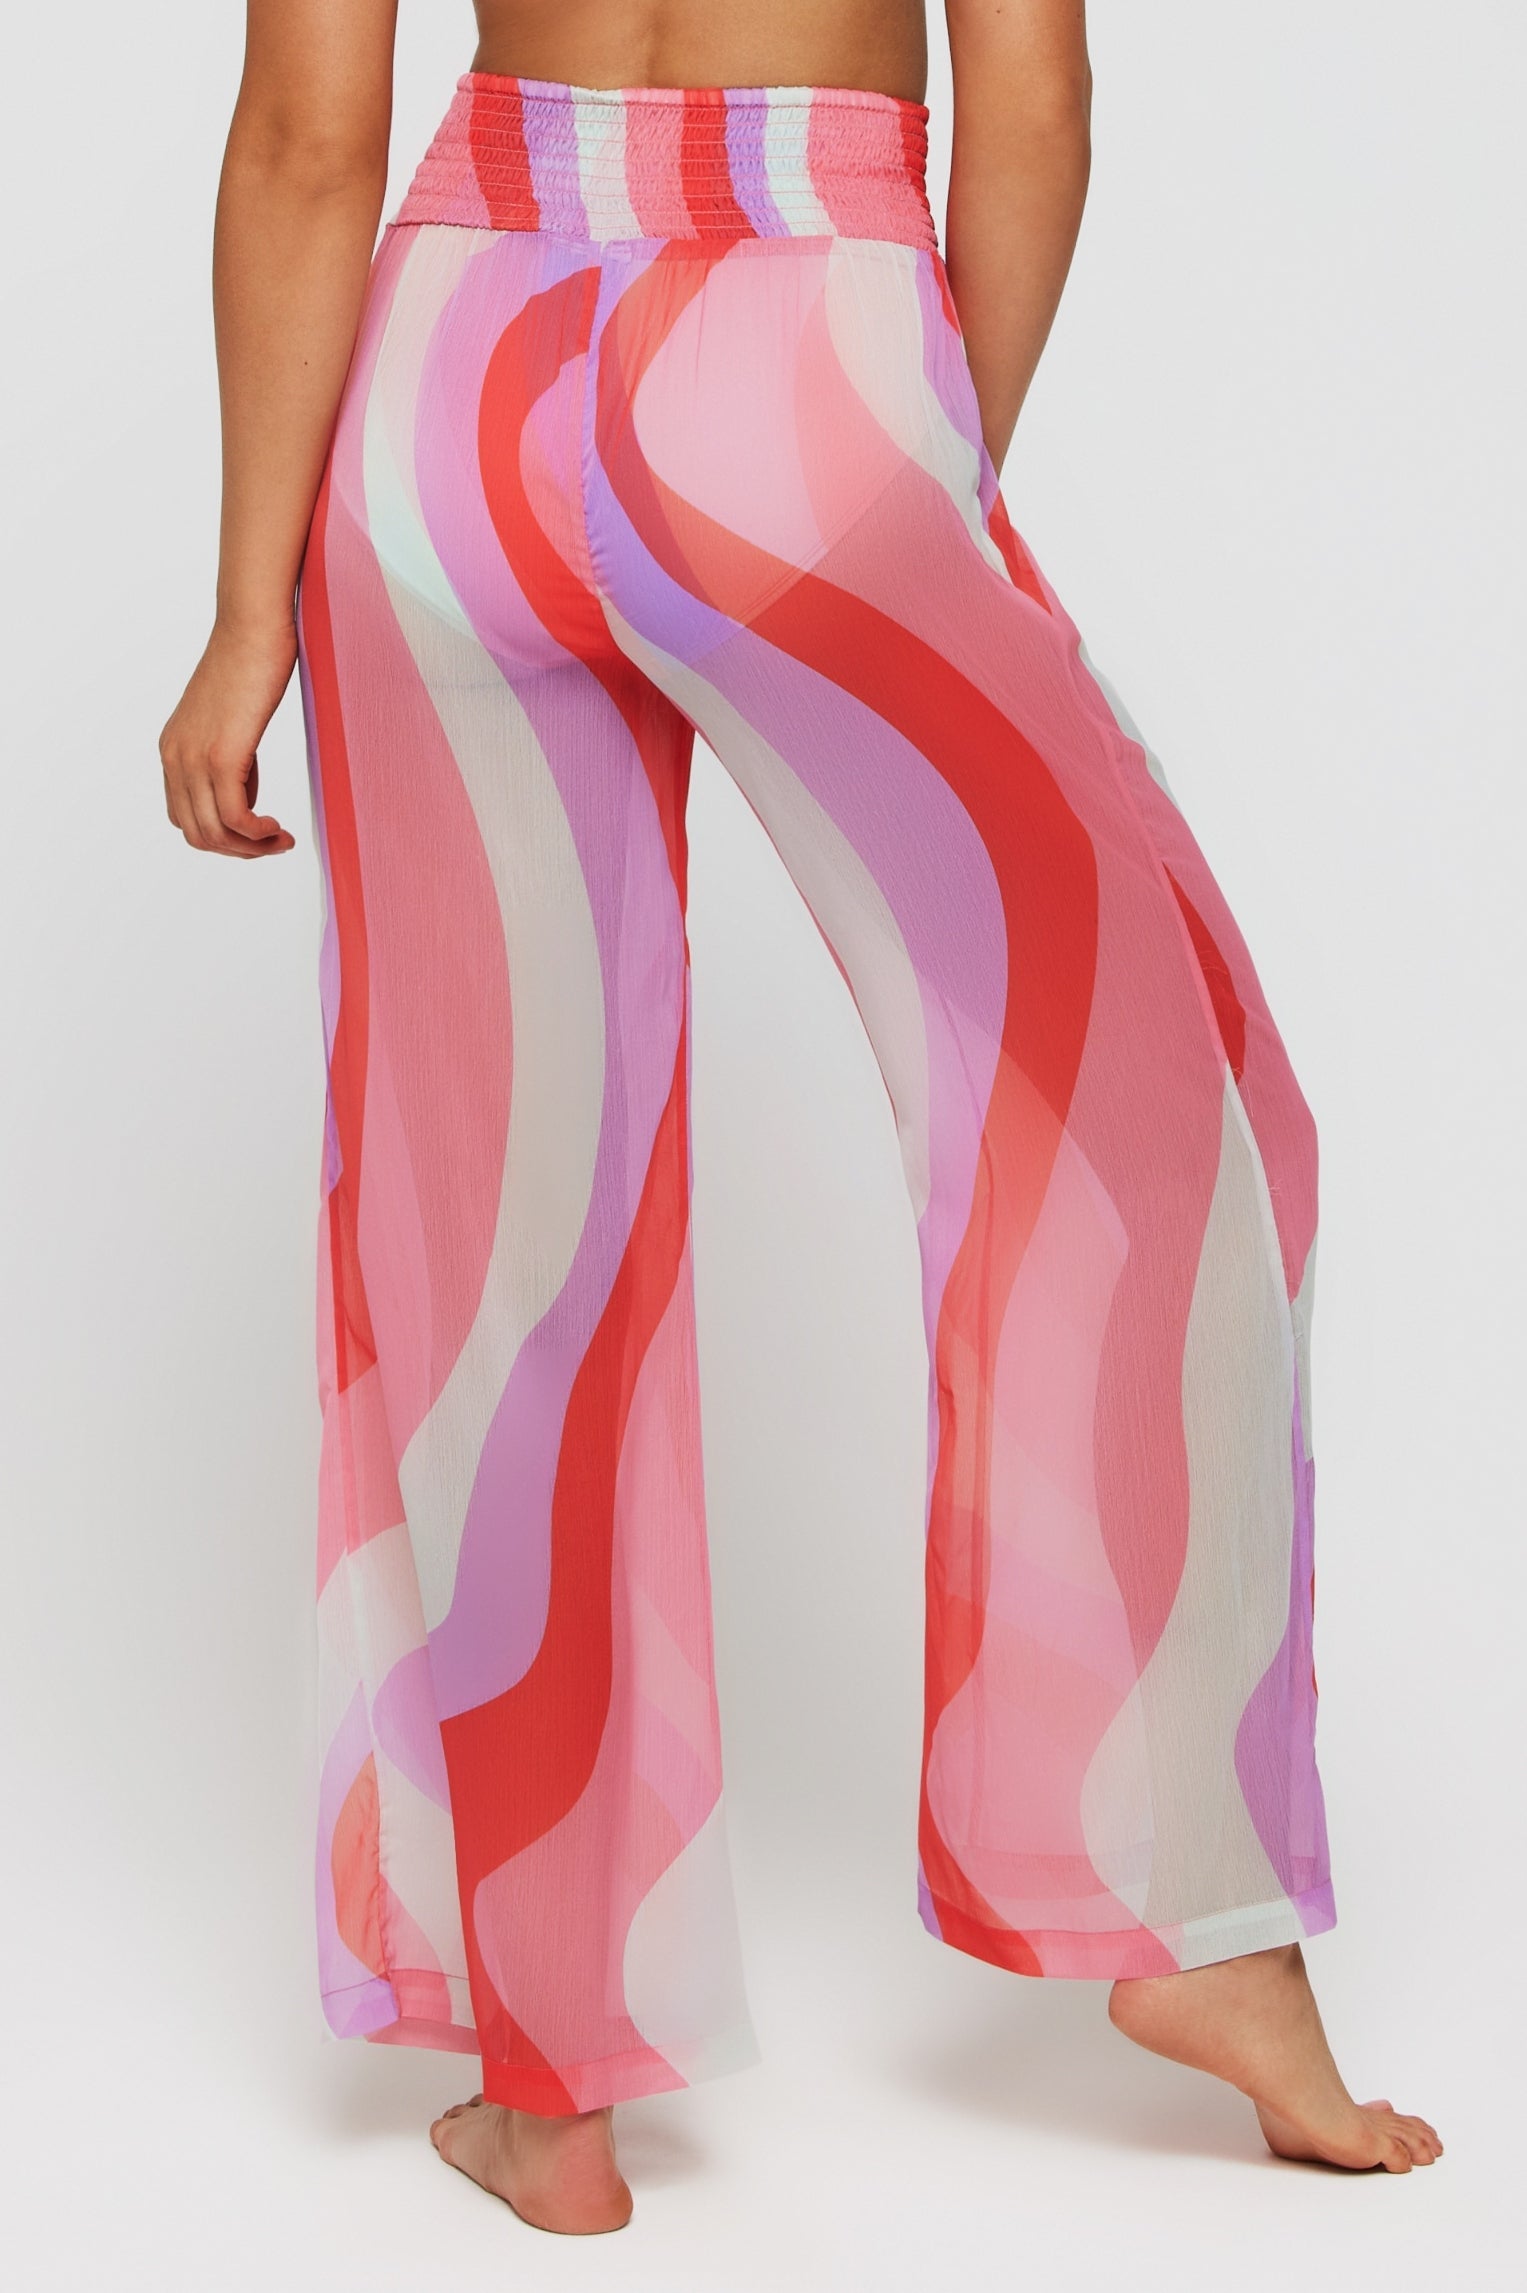 Nora Pant by Hermoza